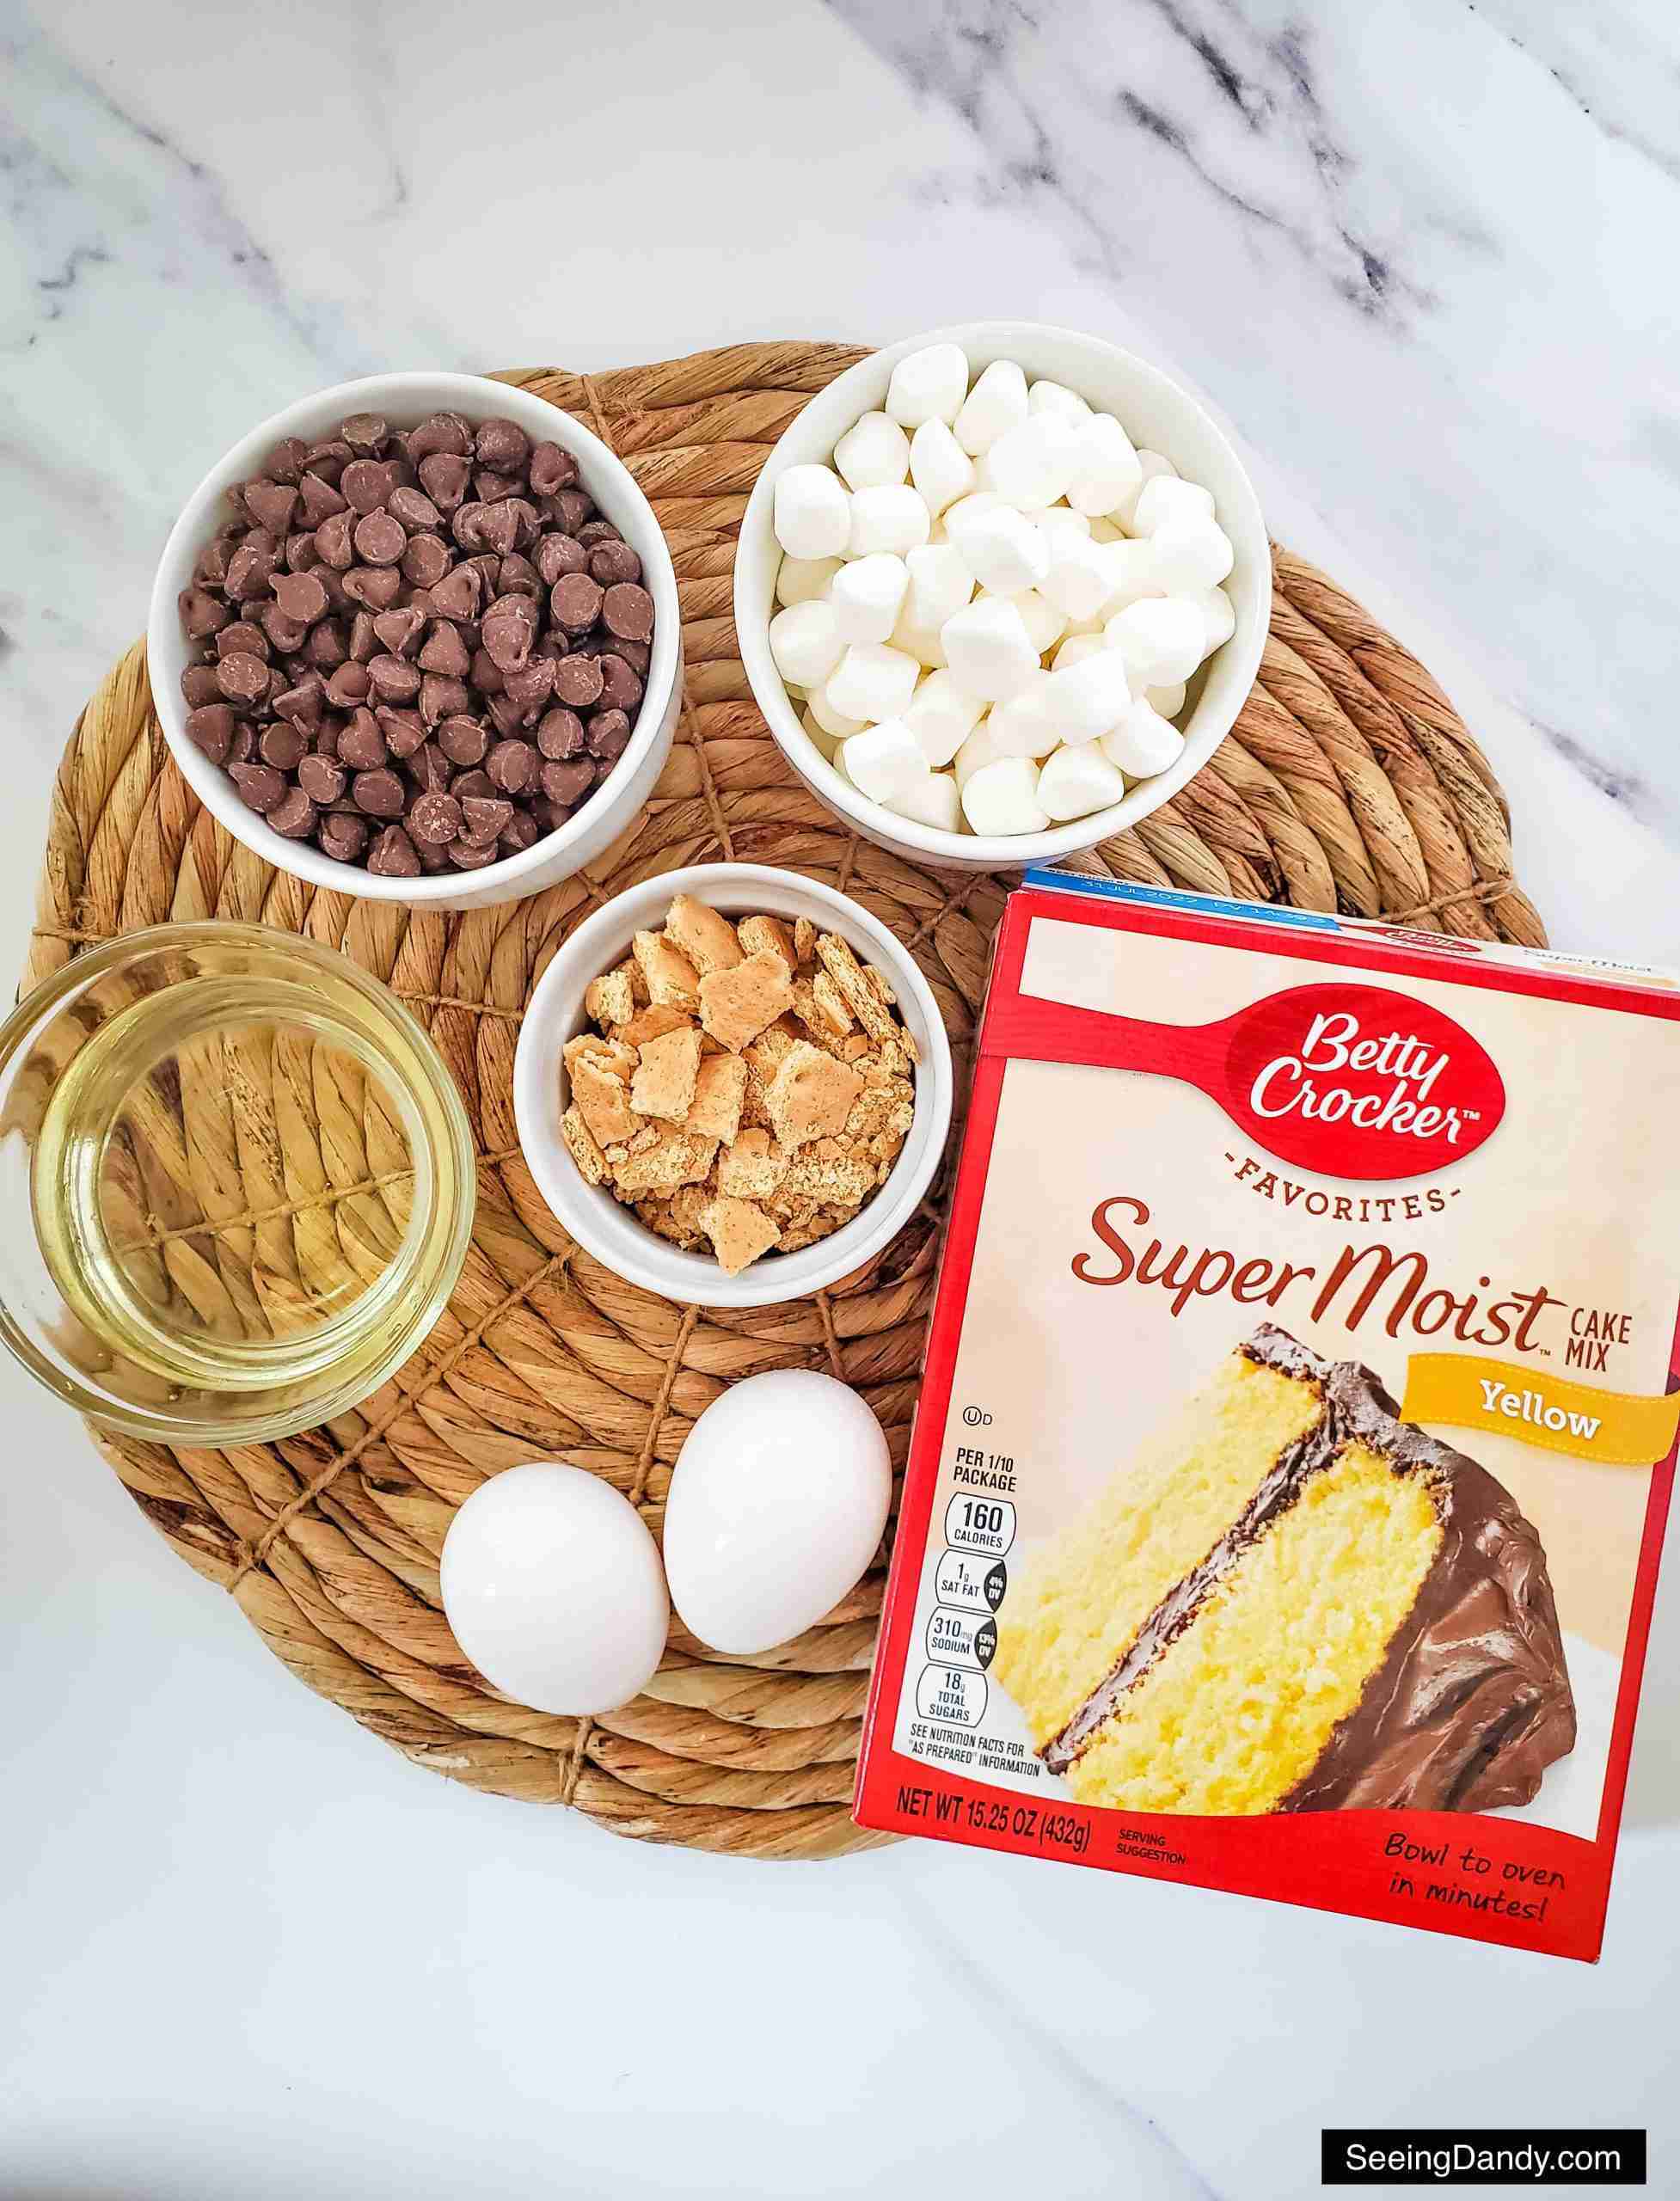 cake mix cookies, s'more ingredients, s'more recipes, betty crocker favorites super moist yellow cake mix, mini marshmallows, chocolate chips, small graham crackers, fresh eggs, cooking oil, marble countertop 